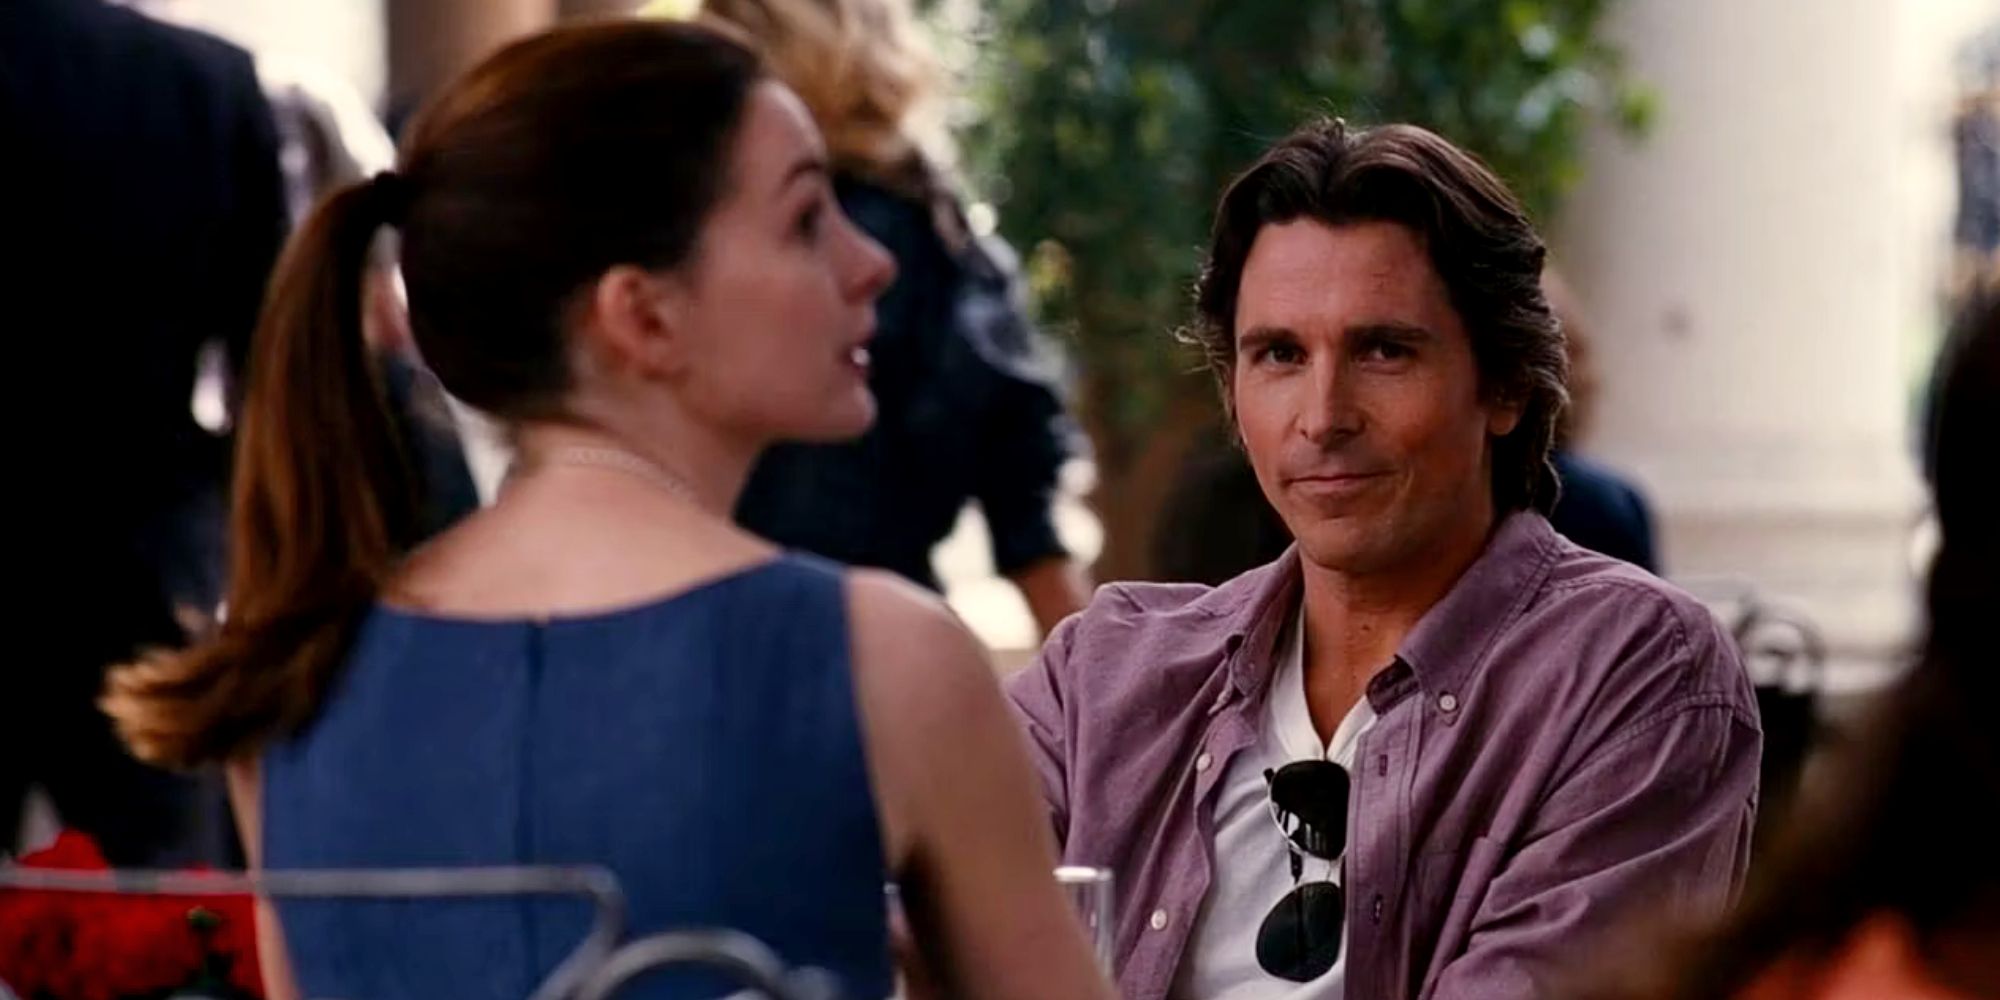 Bruce Wayne (Christian Bale) and Selina Kyle (Anne Hathaway) in The Dark Knight Rises Ending Scene